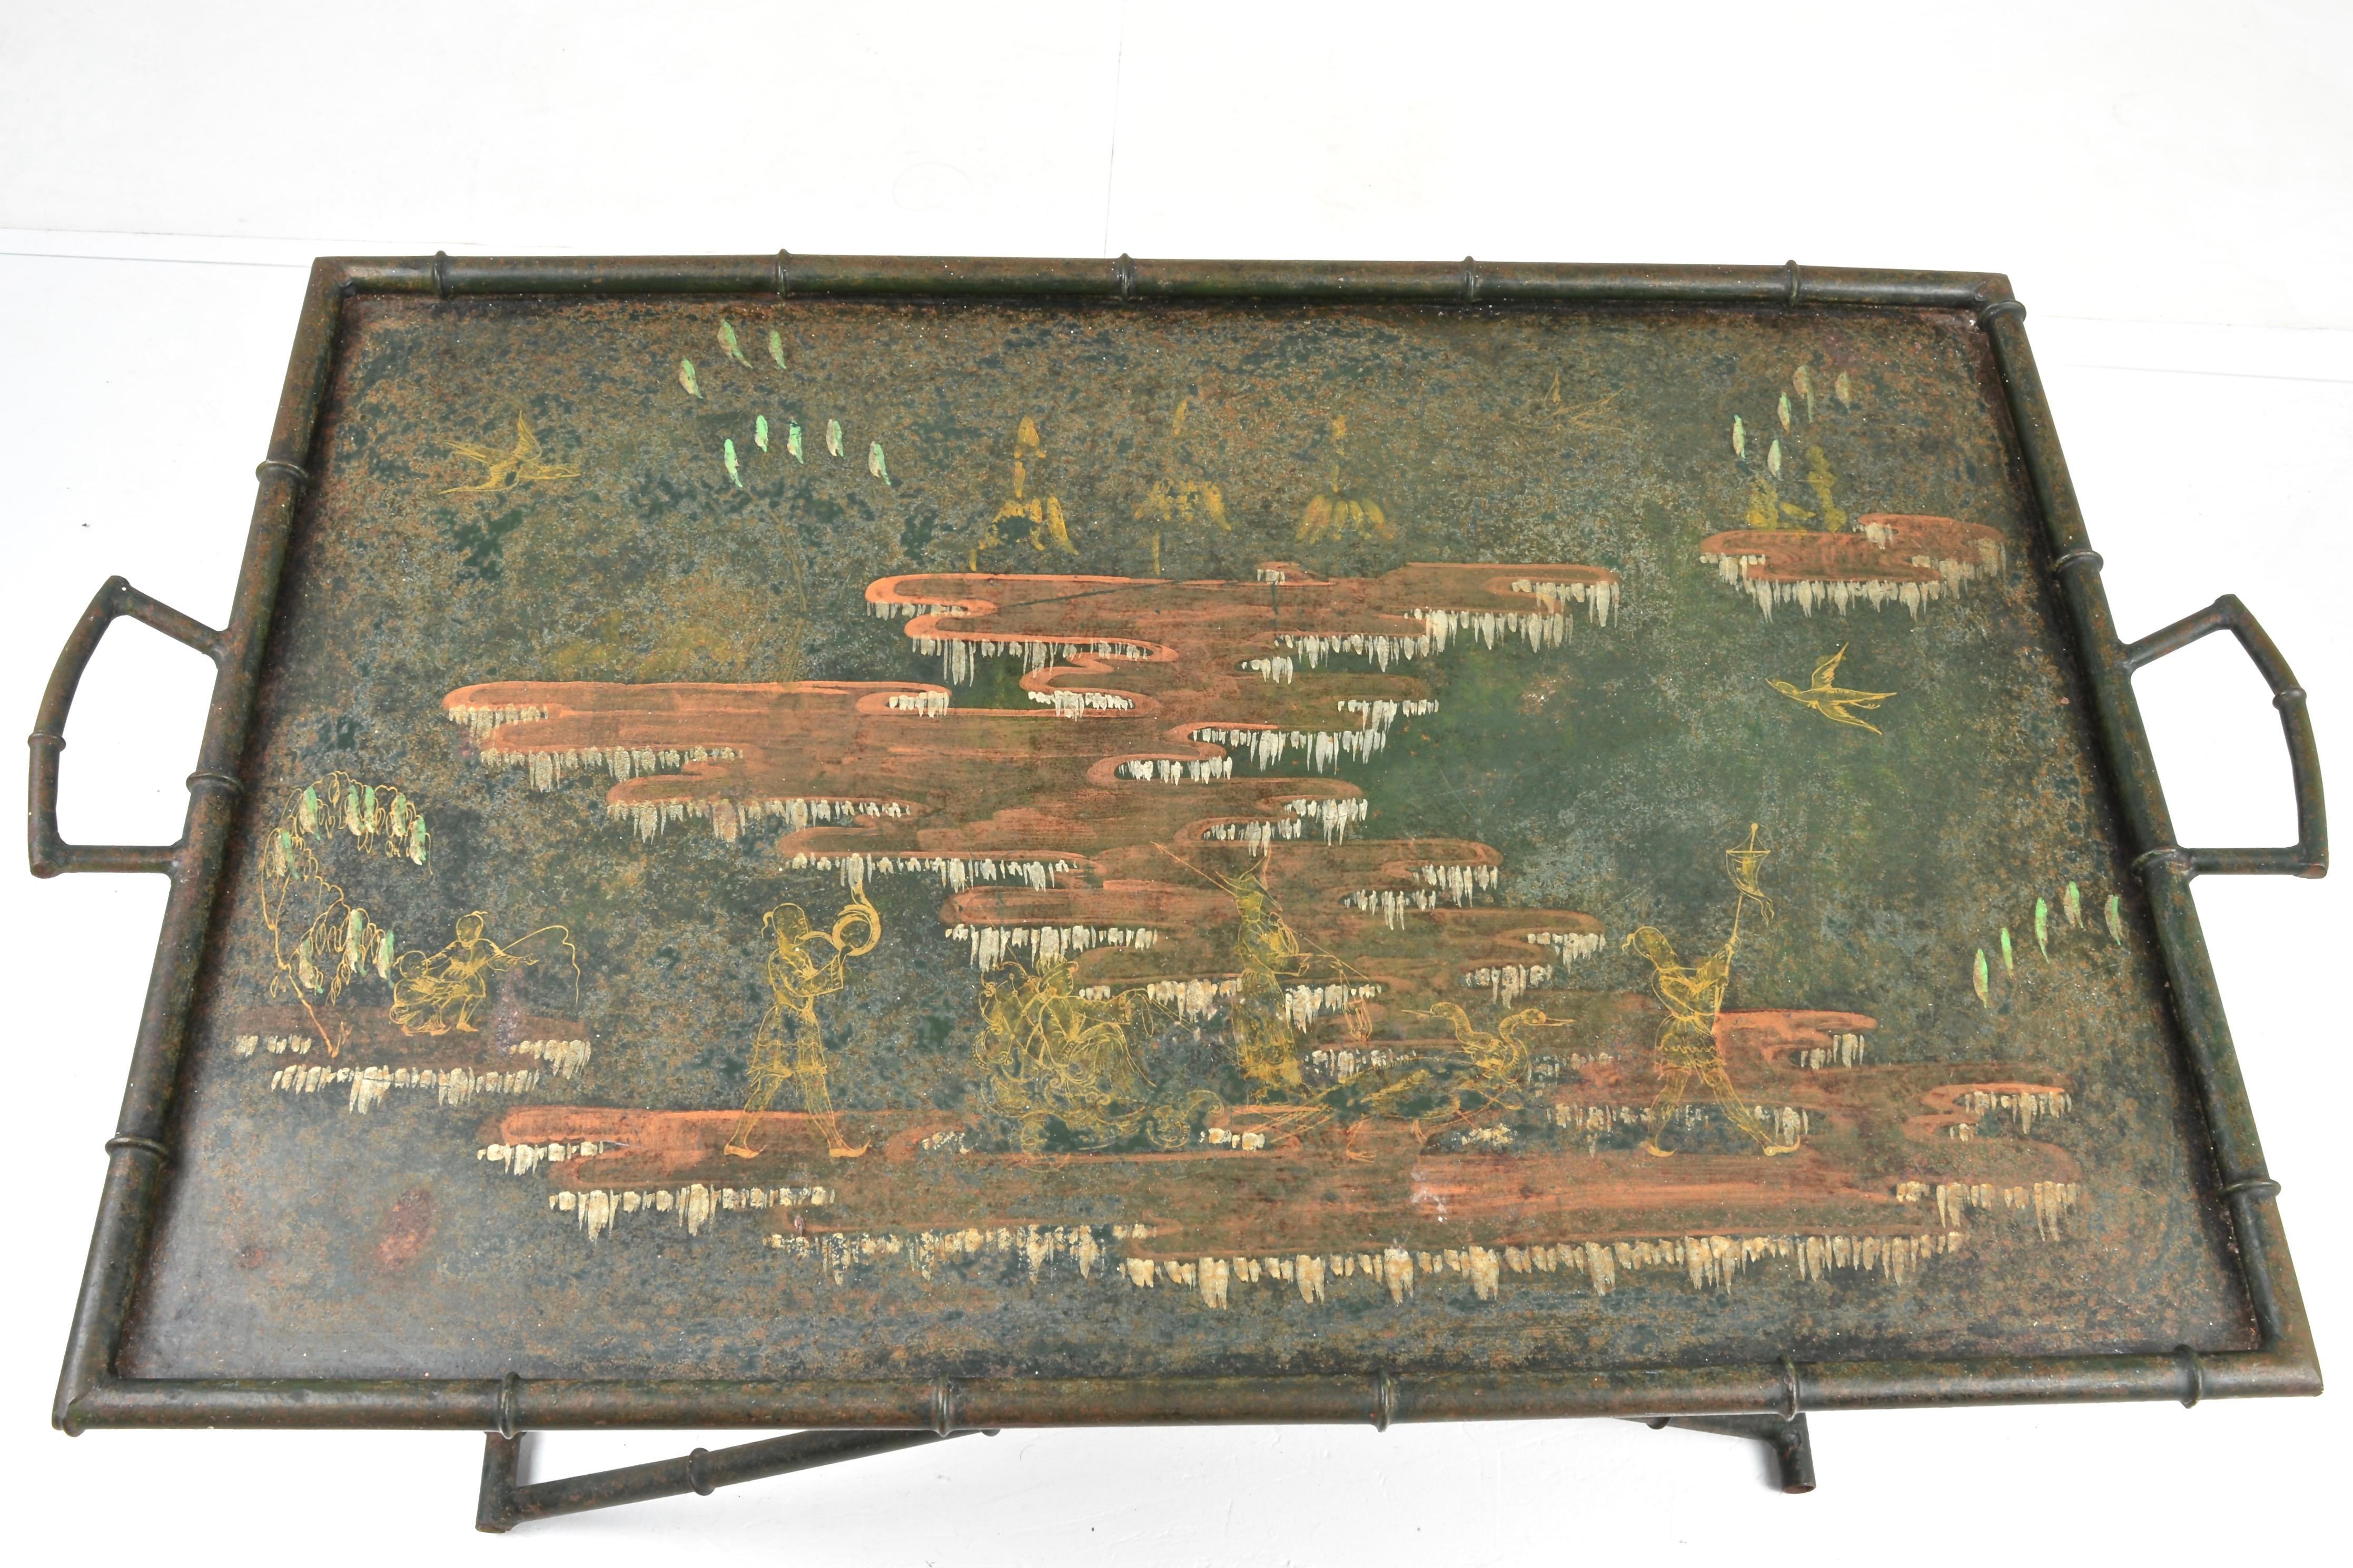 Hand painted chinoiserie scene on a large metal tray with two handles. Metal faux bamboo folding stand adjusts from a low cocktail table (14-16